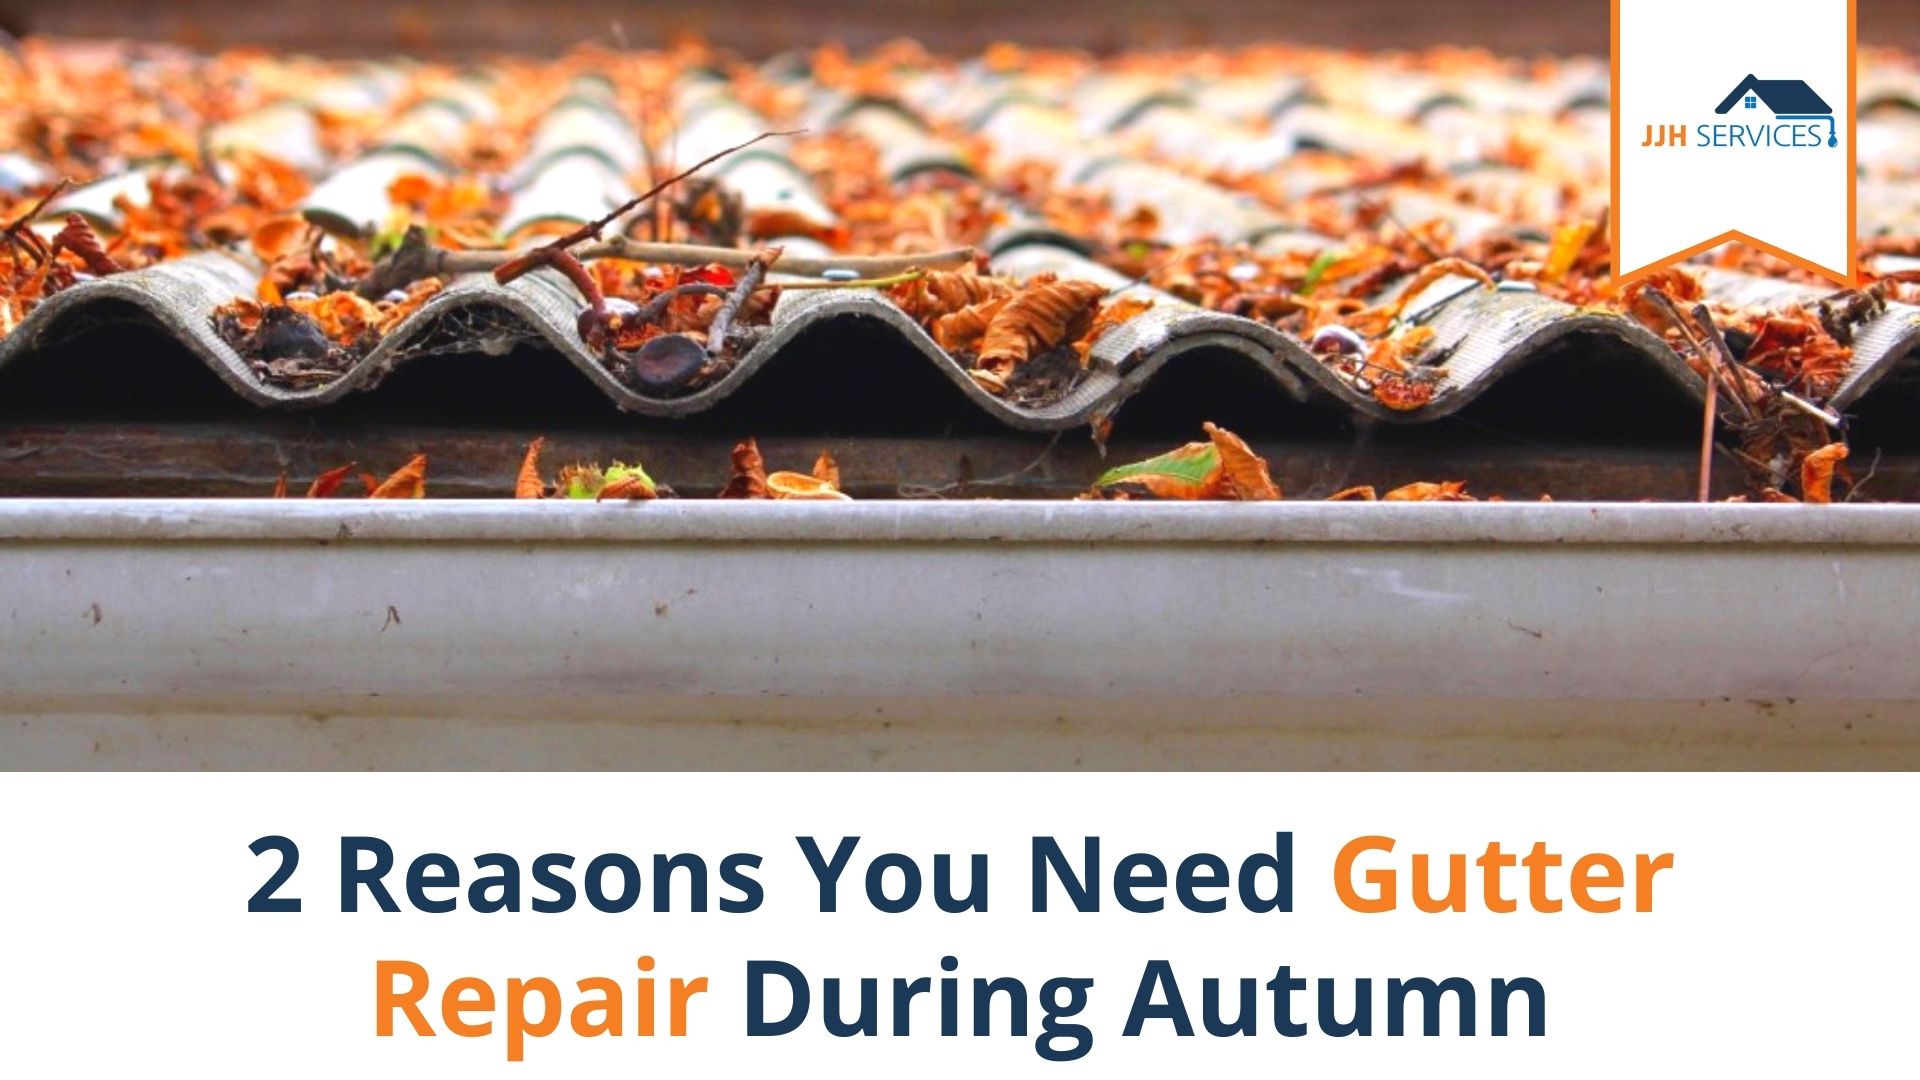 2 Reasons You Need Gutter Repair During Autumn